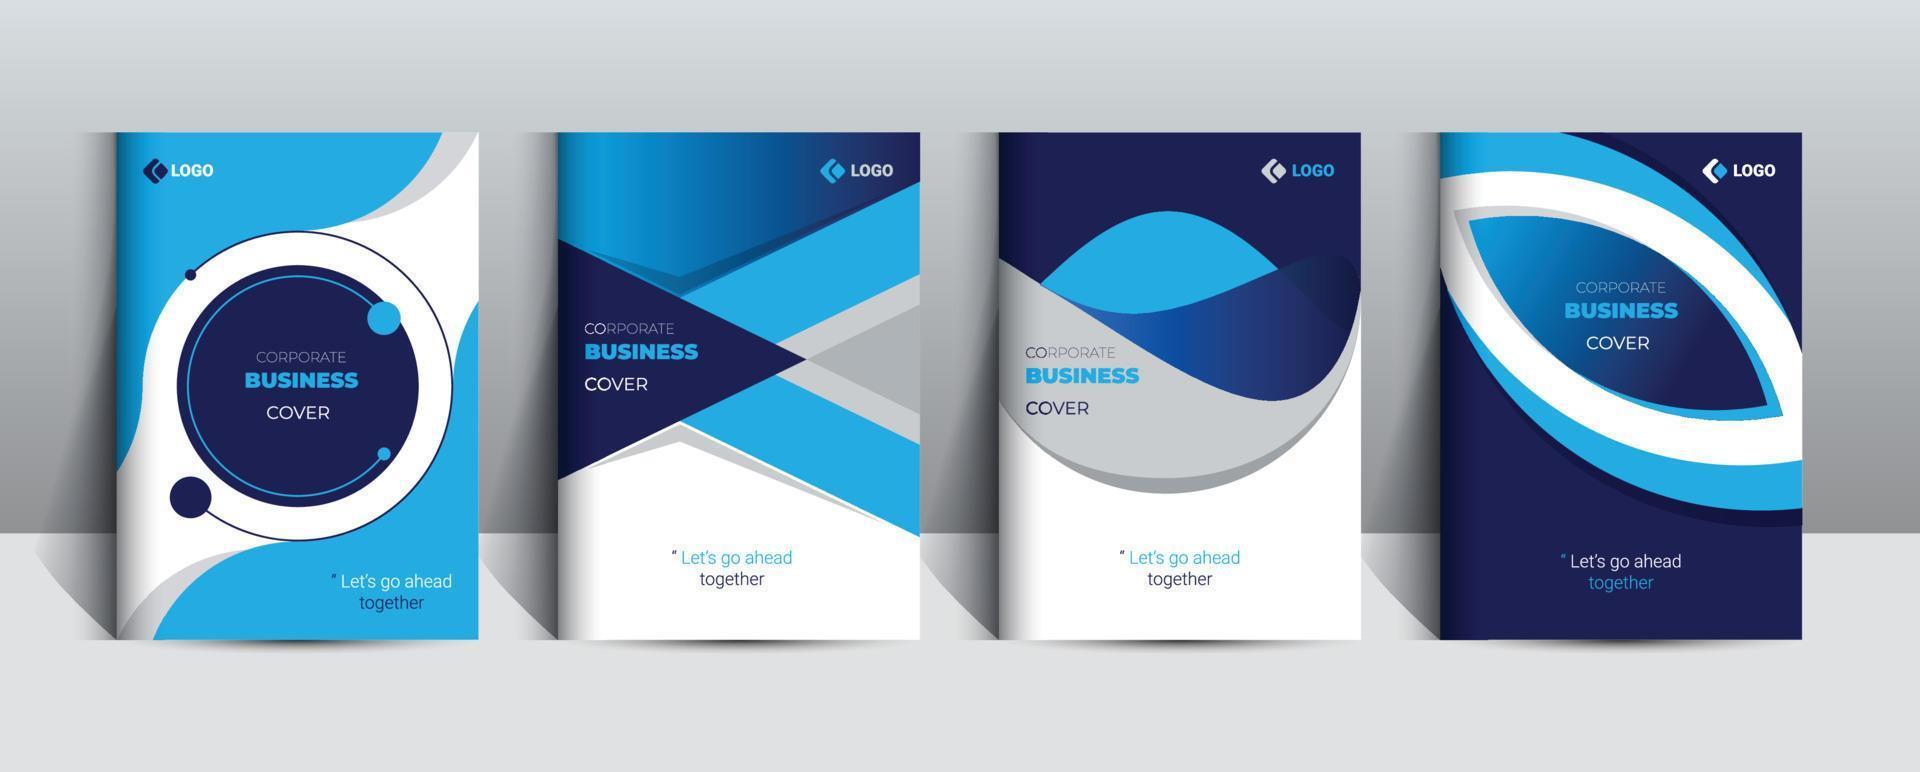 Blue Corporate Business Cover Design Template adept for multipurpose Projects vector